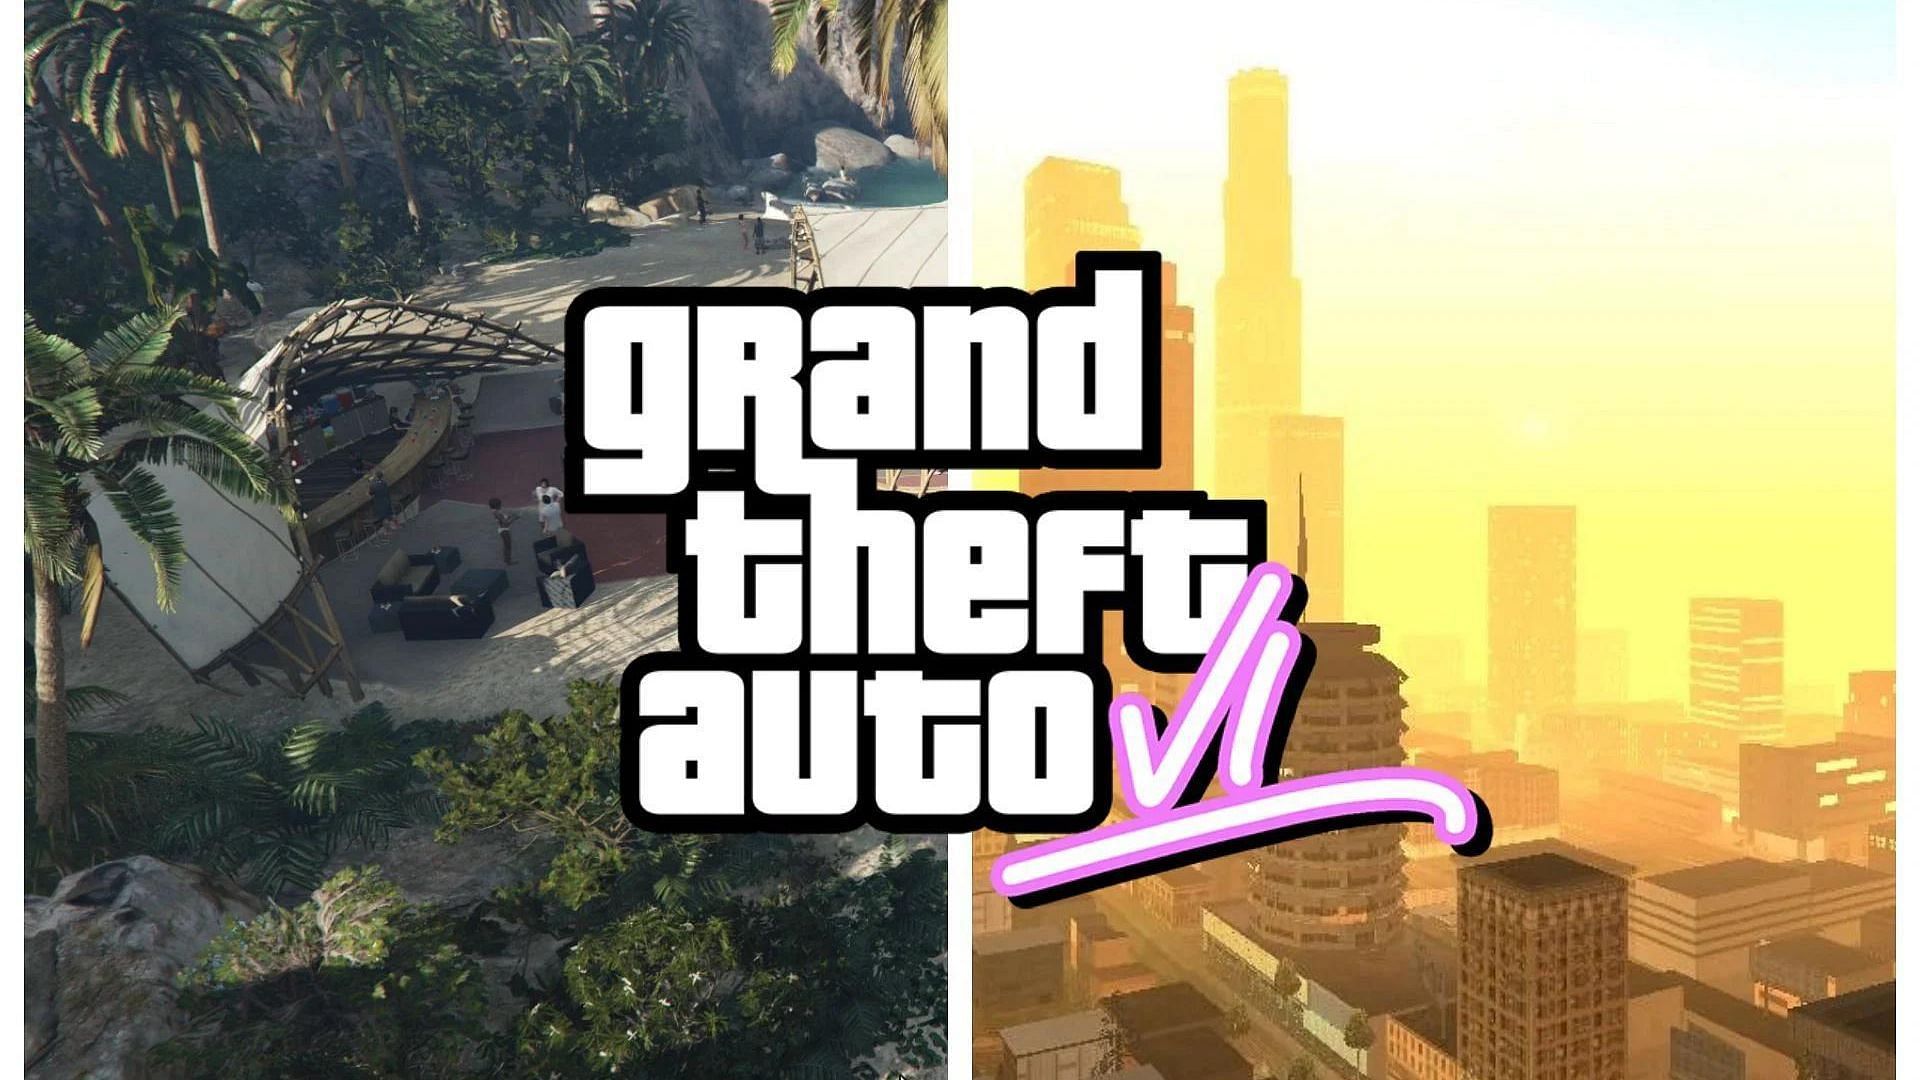 Where will GTA 6 take place